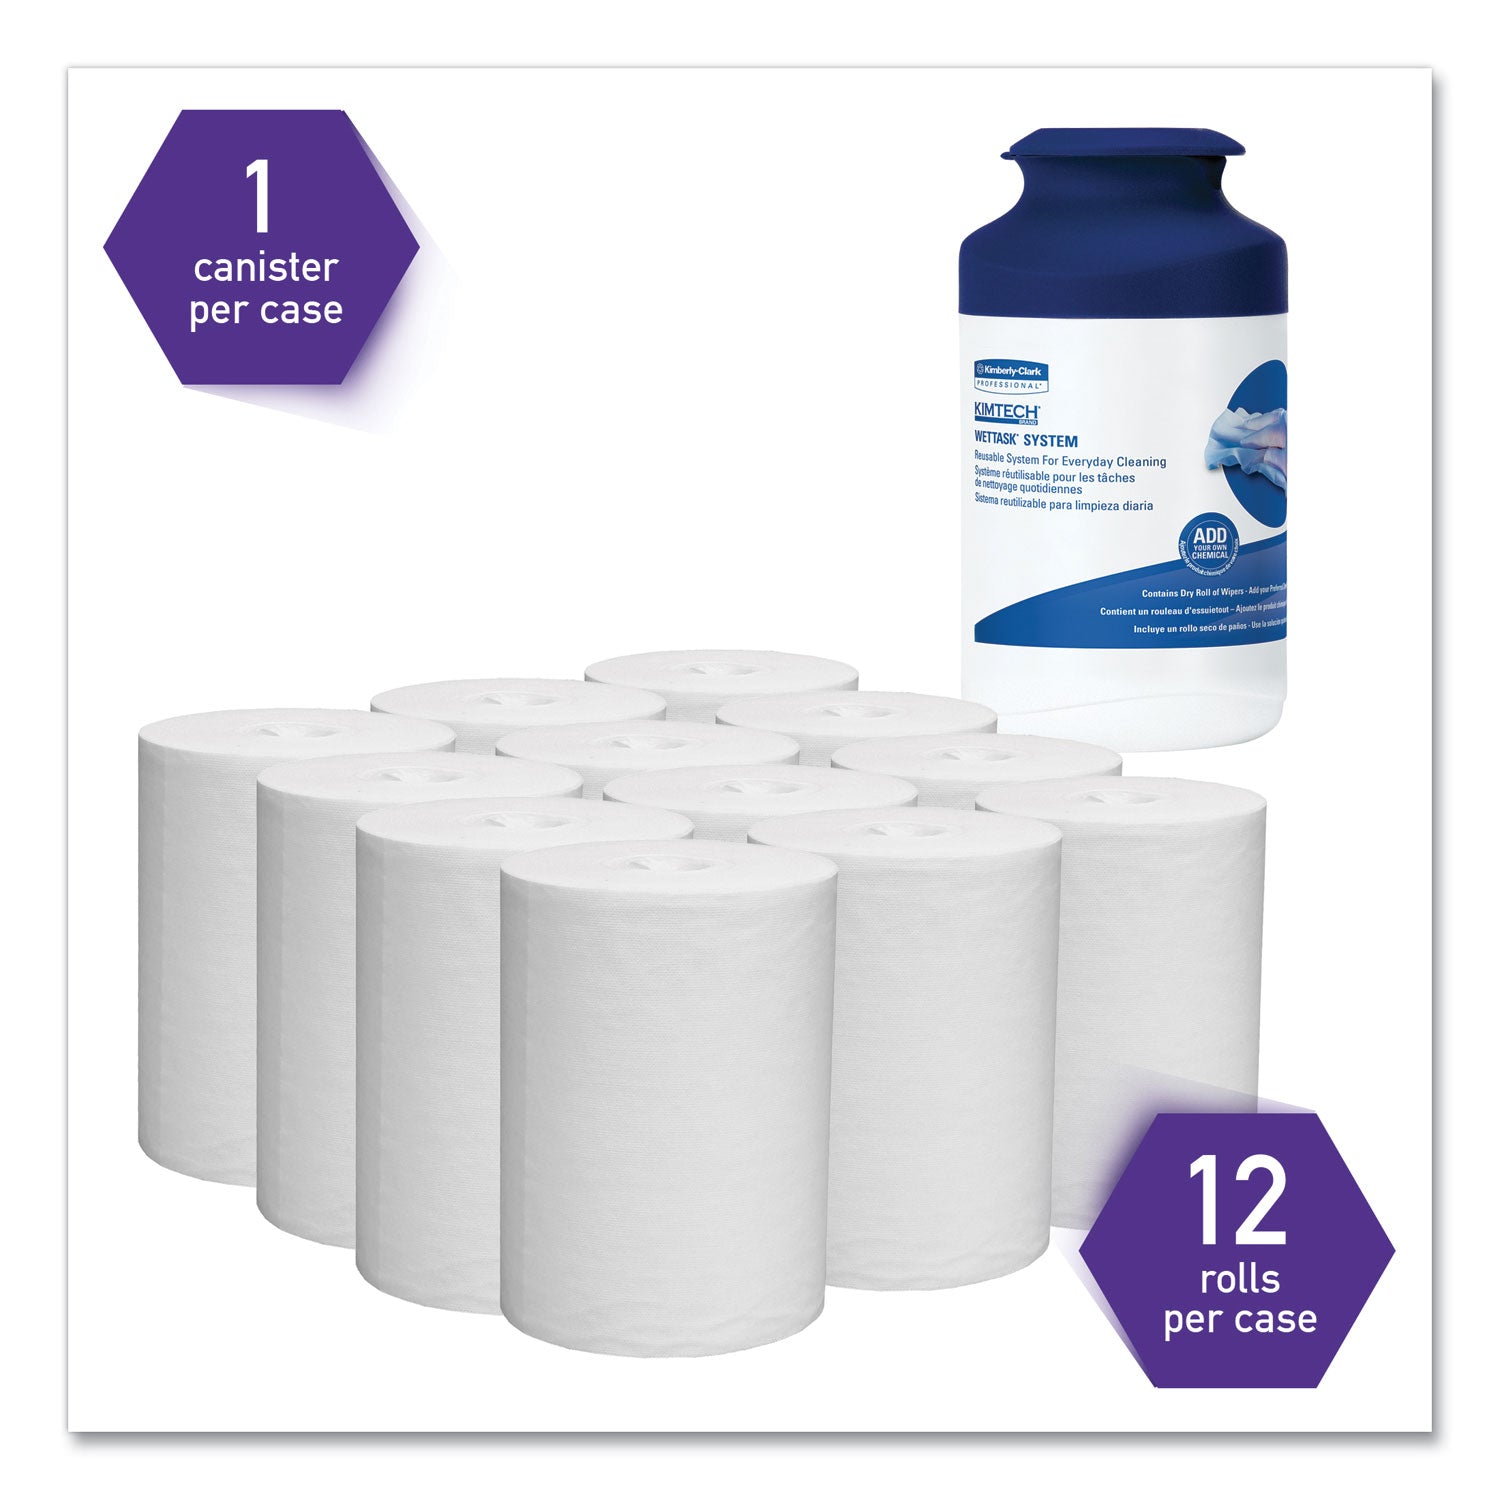 wettask-system-prep-wipers-for-bleach-disinfectants-sanitizers-hygienic-enclosed-system-refills-w-canister-55-rl12-roll-ct_kcc7732005 - 2